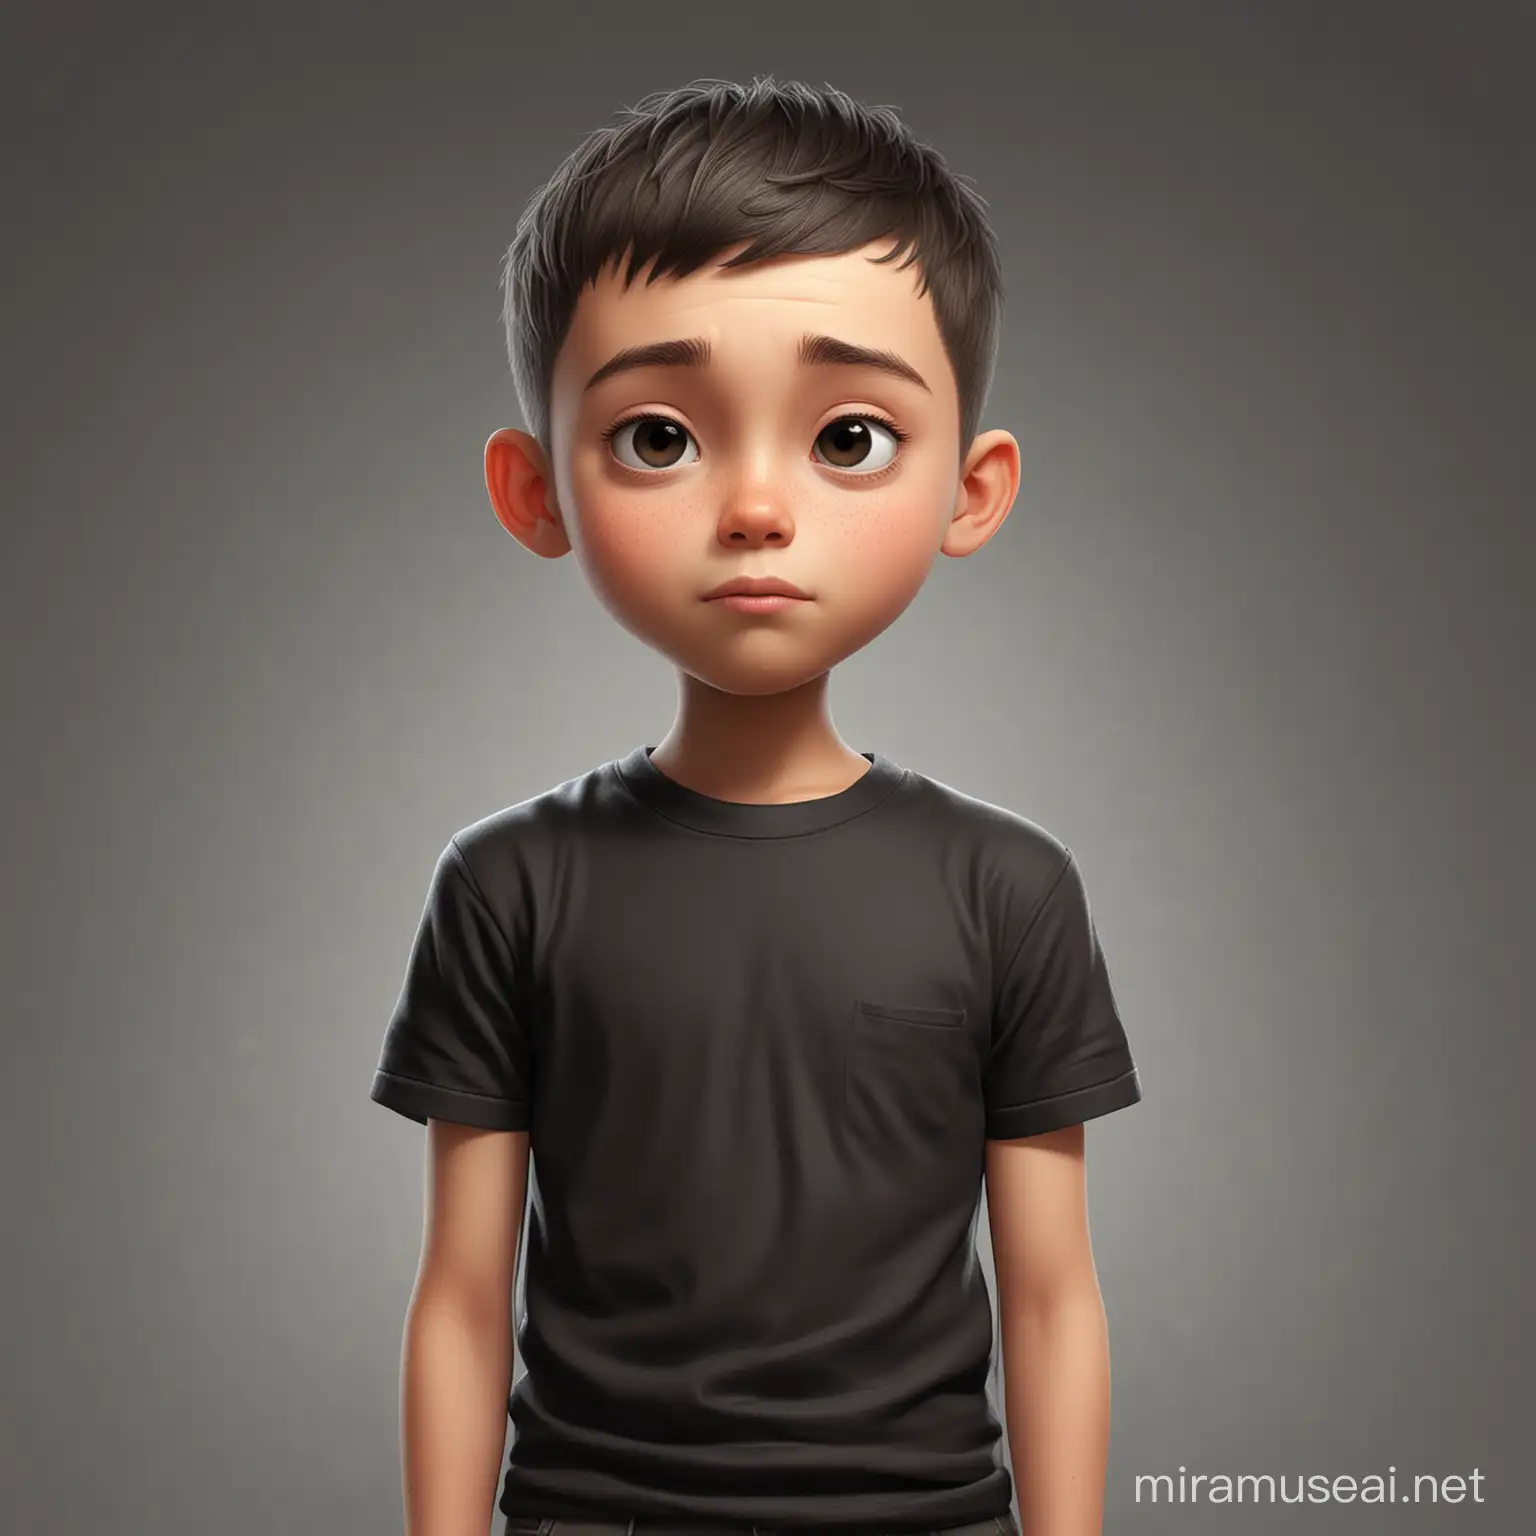 A male kid have 11 years old , closing his eyes to try to think focus , have a dark buzz cut hair , small dark black eyes, round face , light skin , black t-shirt, show the full body of him. cartoon type .